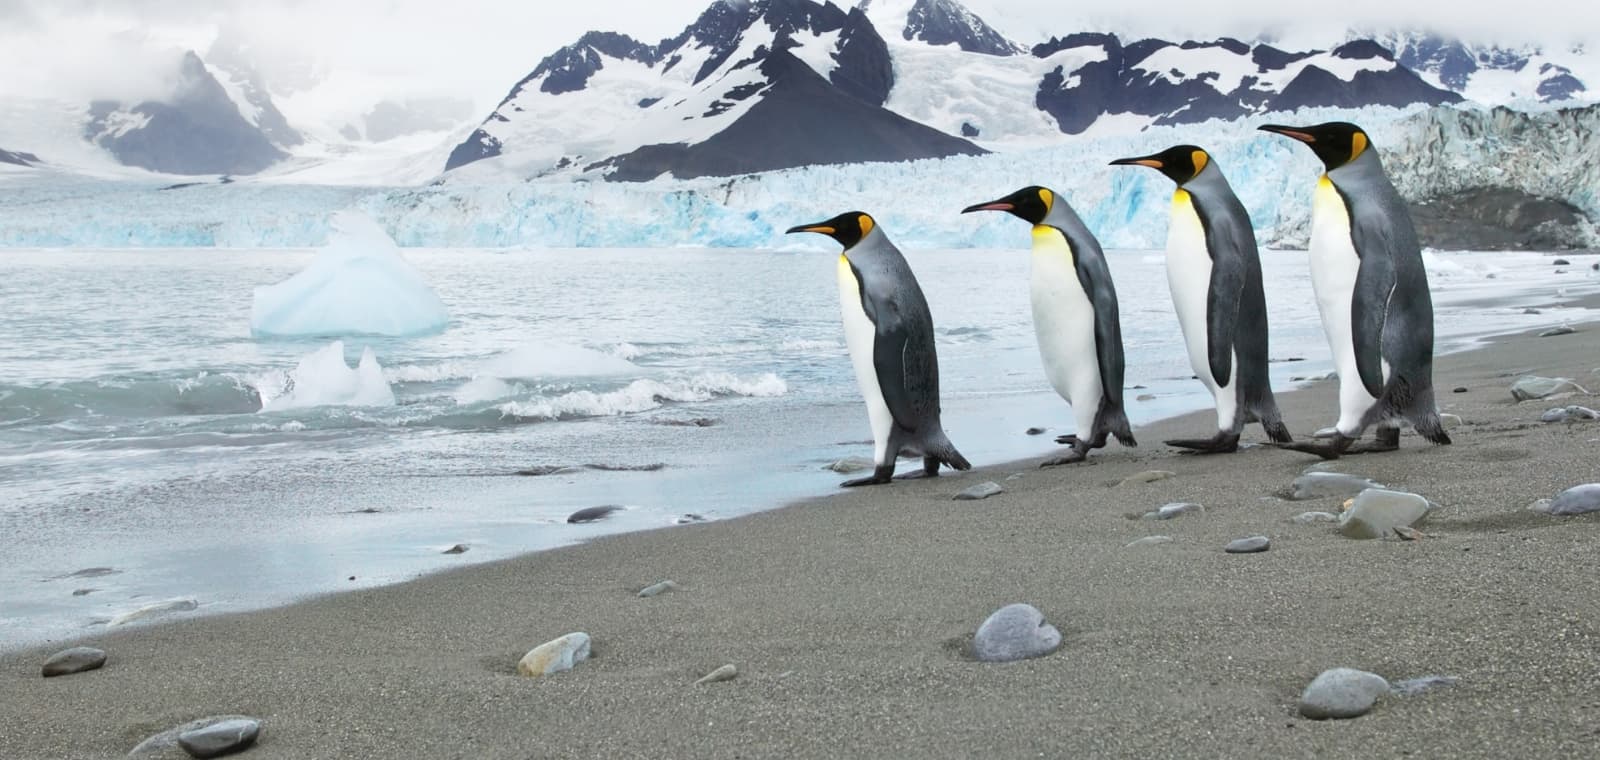 Four King penguins toddle along a sandy beach toward an icy sea. Beyond them rise the mountains of Tierra del Fuego.